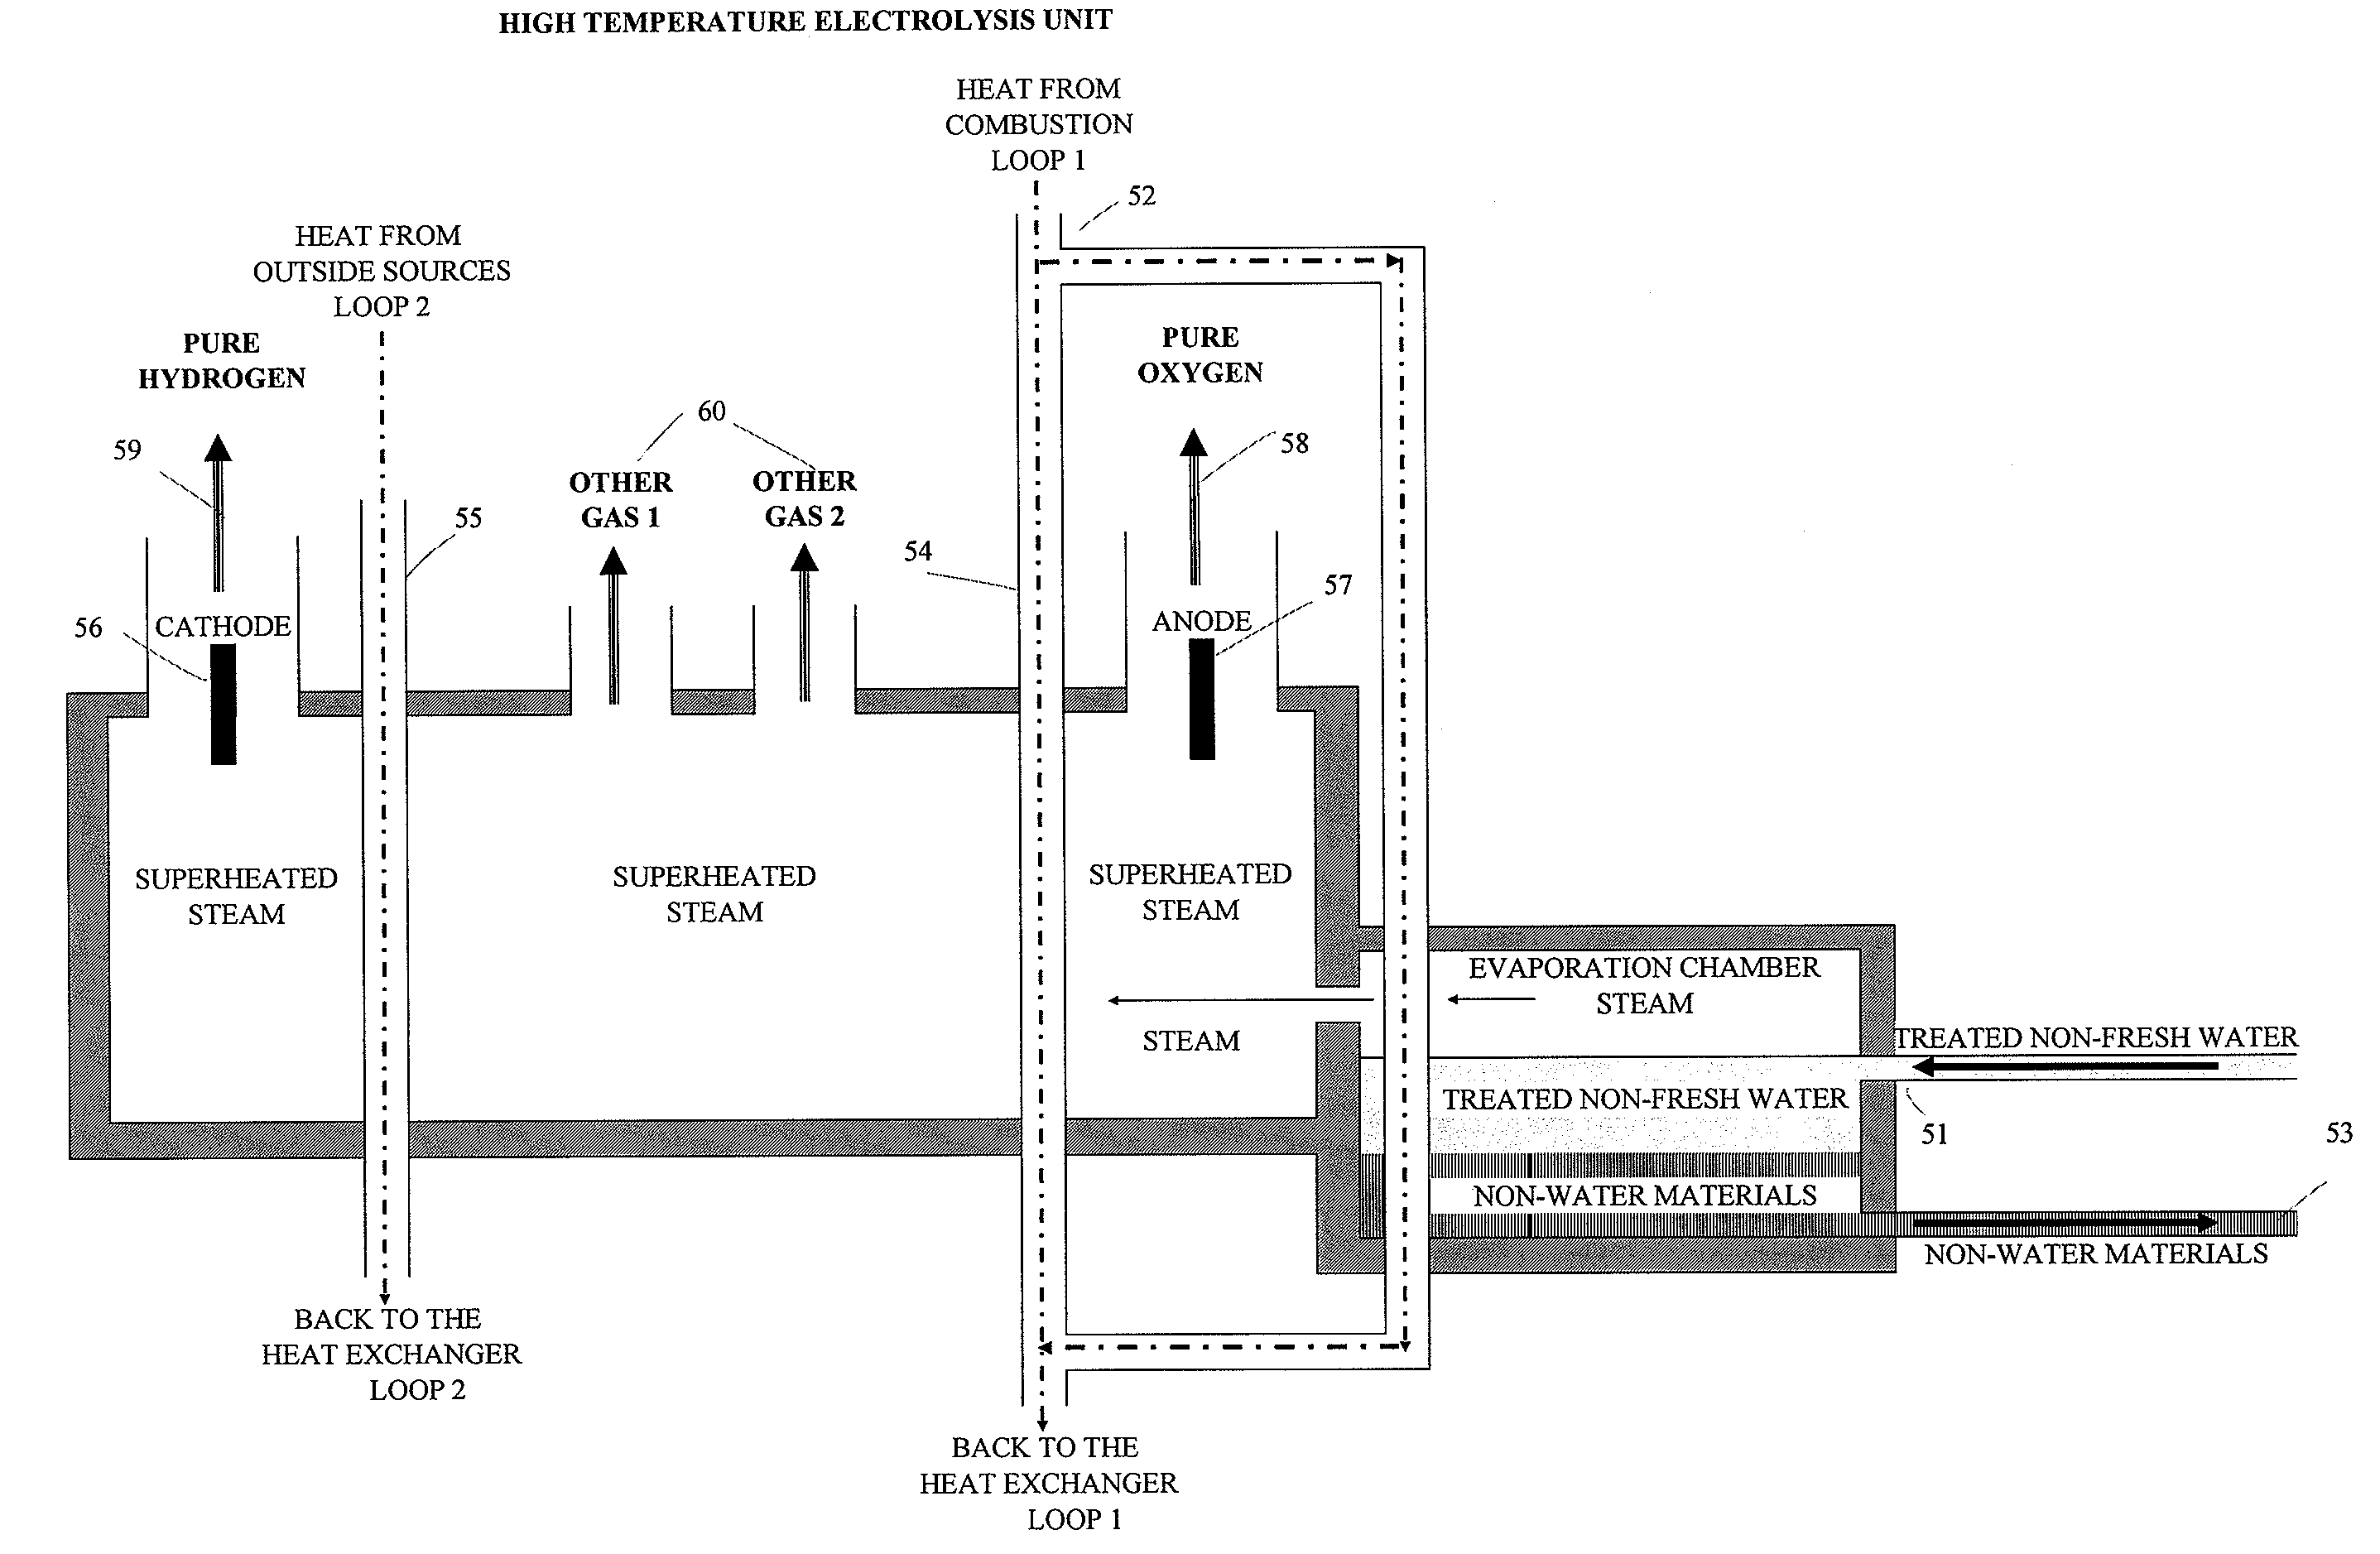 System and process for converting non-fresh water to fresh water